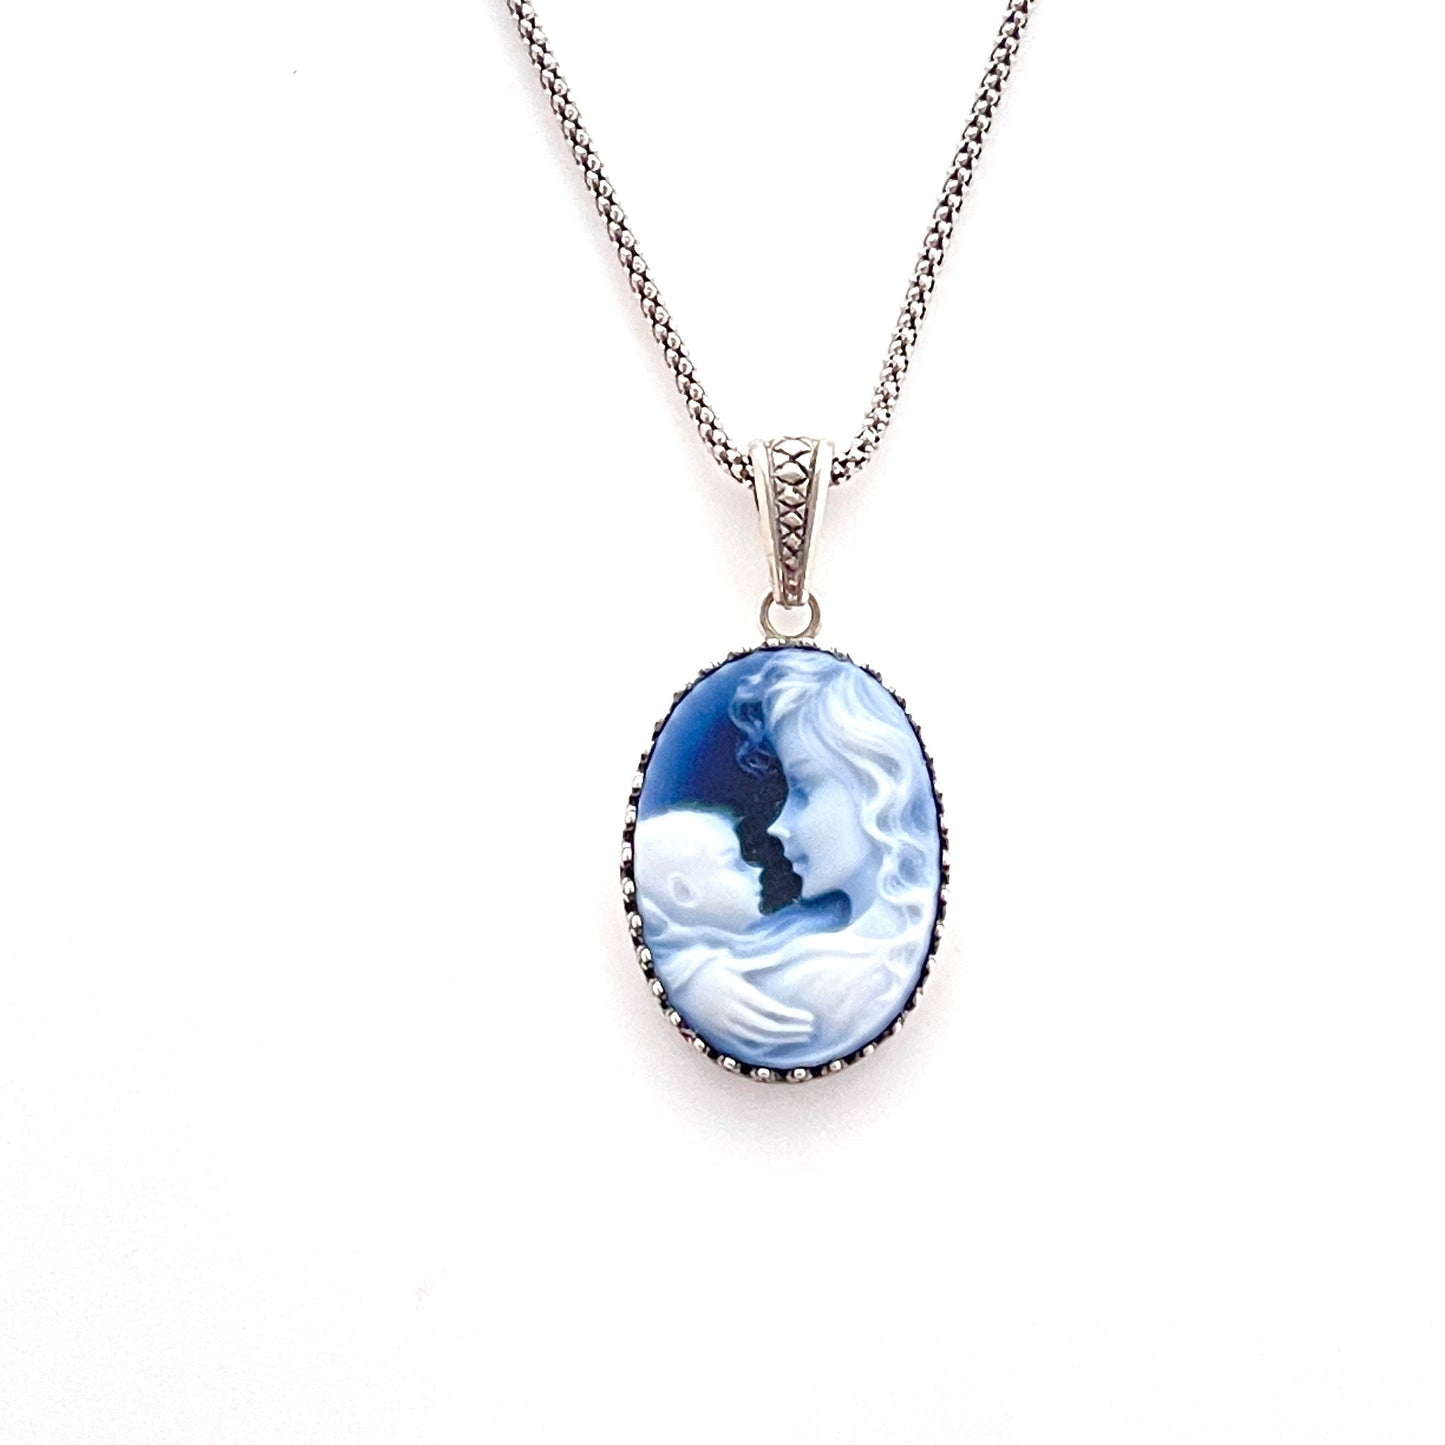 Mother and Child Cameo Necklace, European Cameo, Gift for Mom, Sterling Silver Jewelry, Blue Agate Cameo Pendant, Family Jewelry